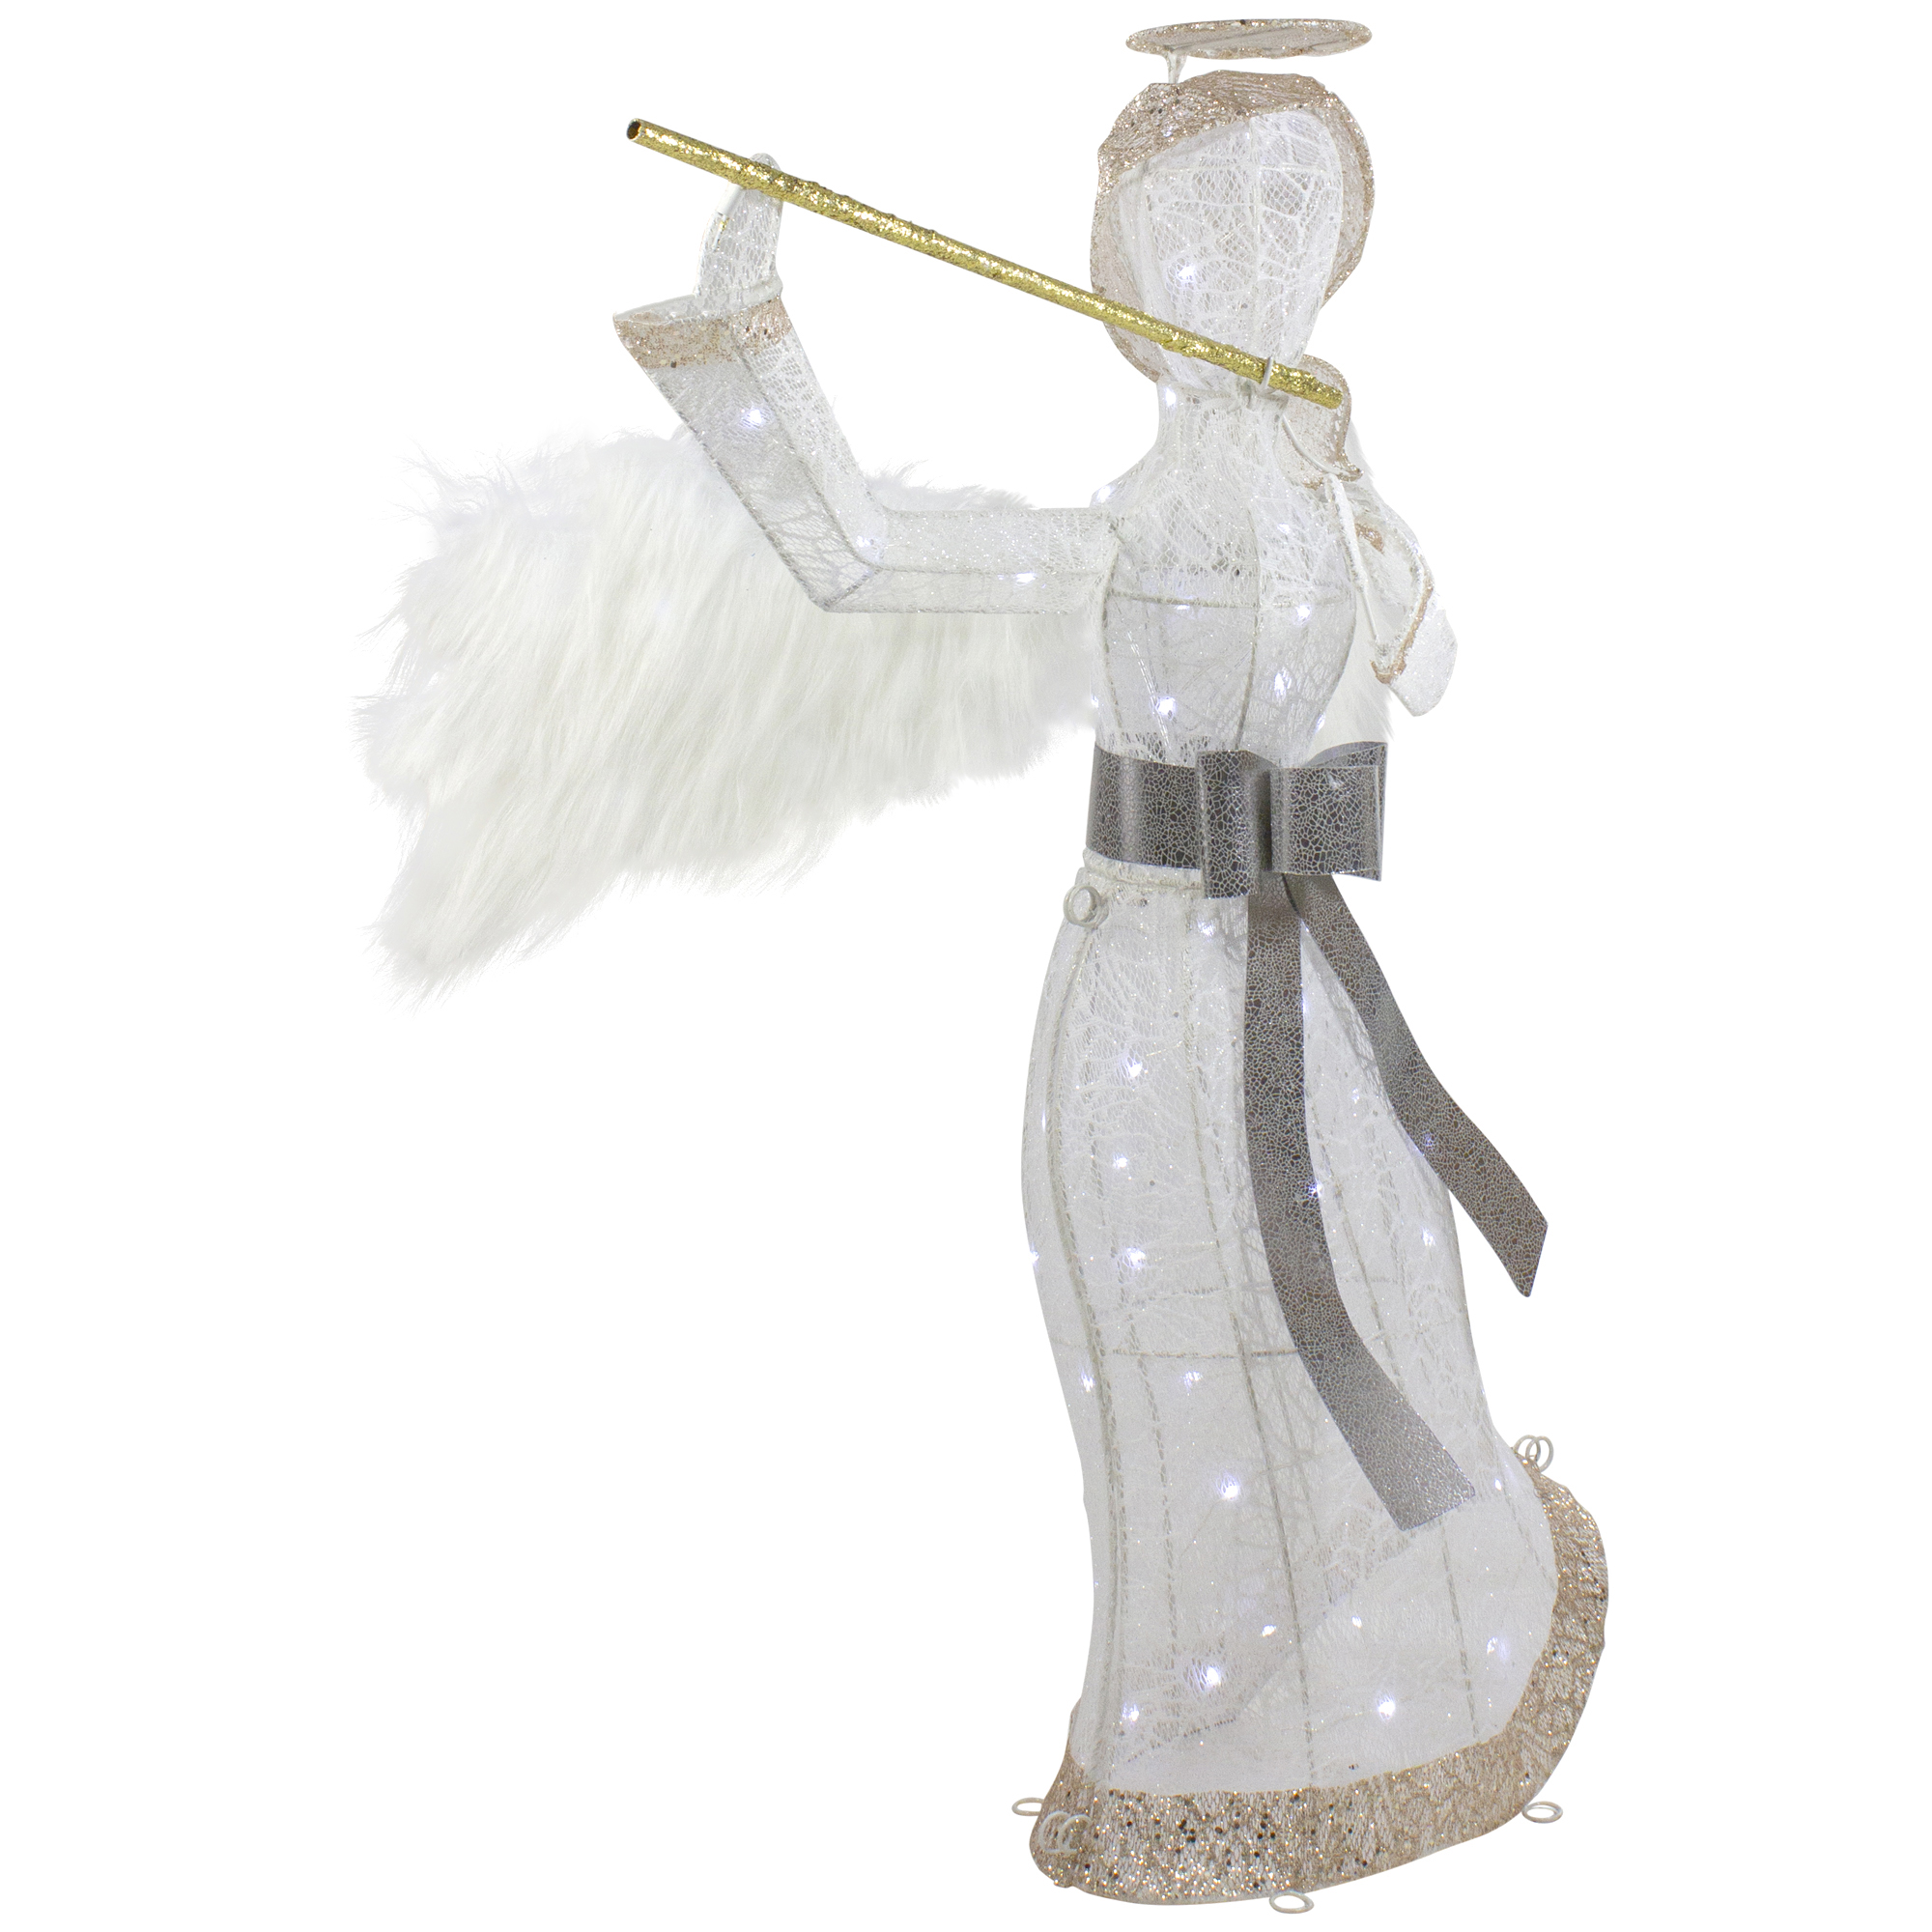 Northlight 36" LED Lighted Lace Angel with Flute Outdoor Christmas Decoration